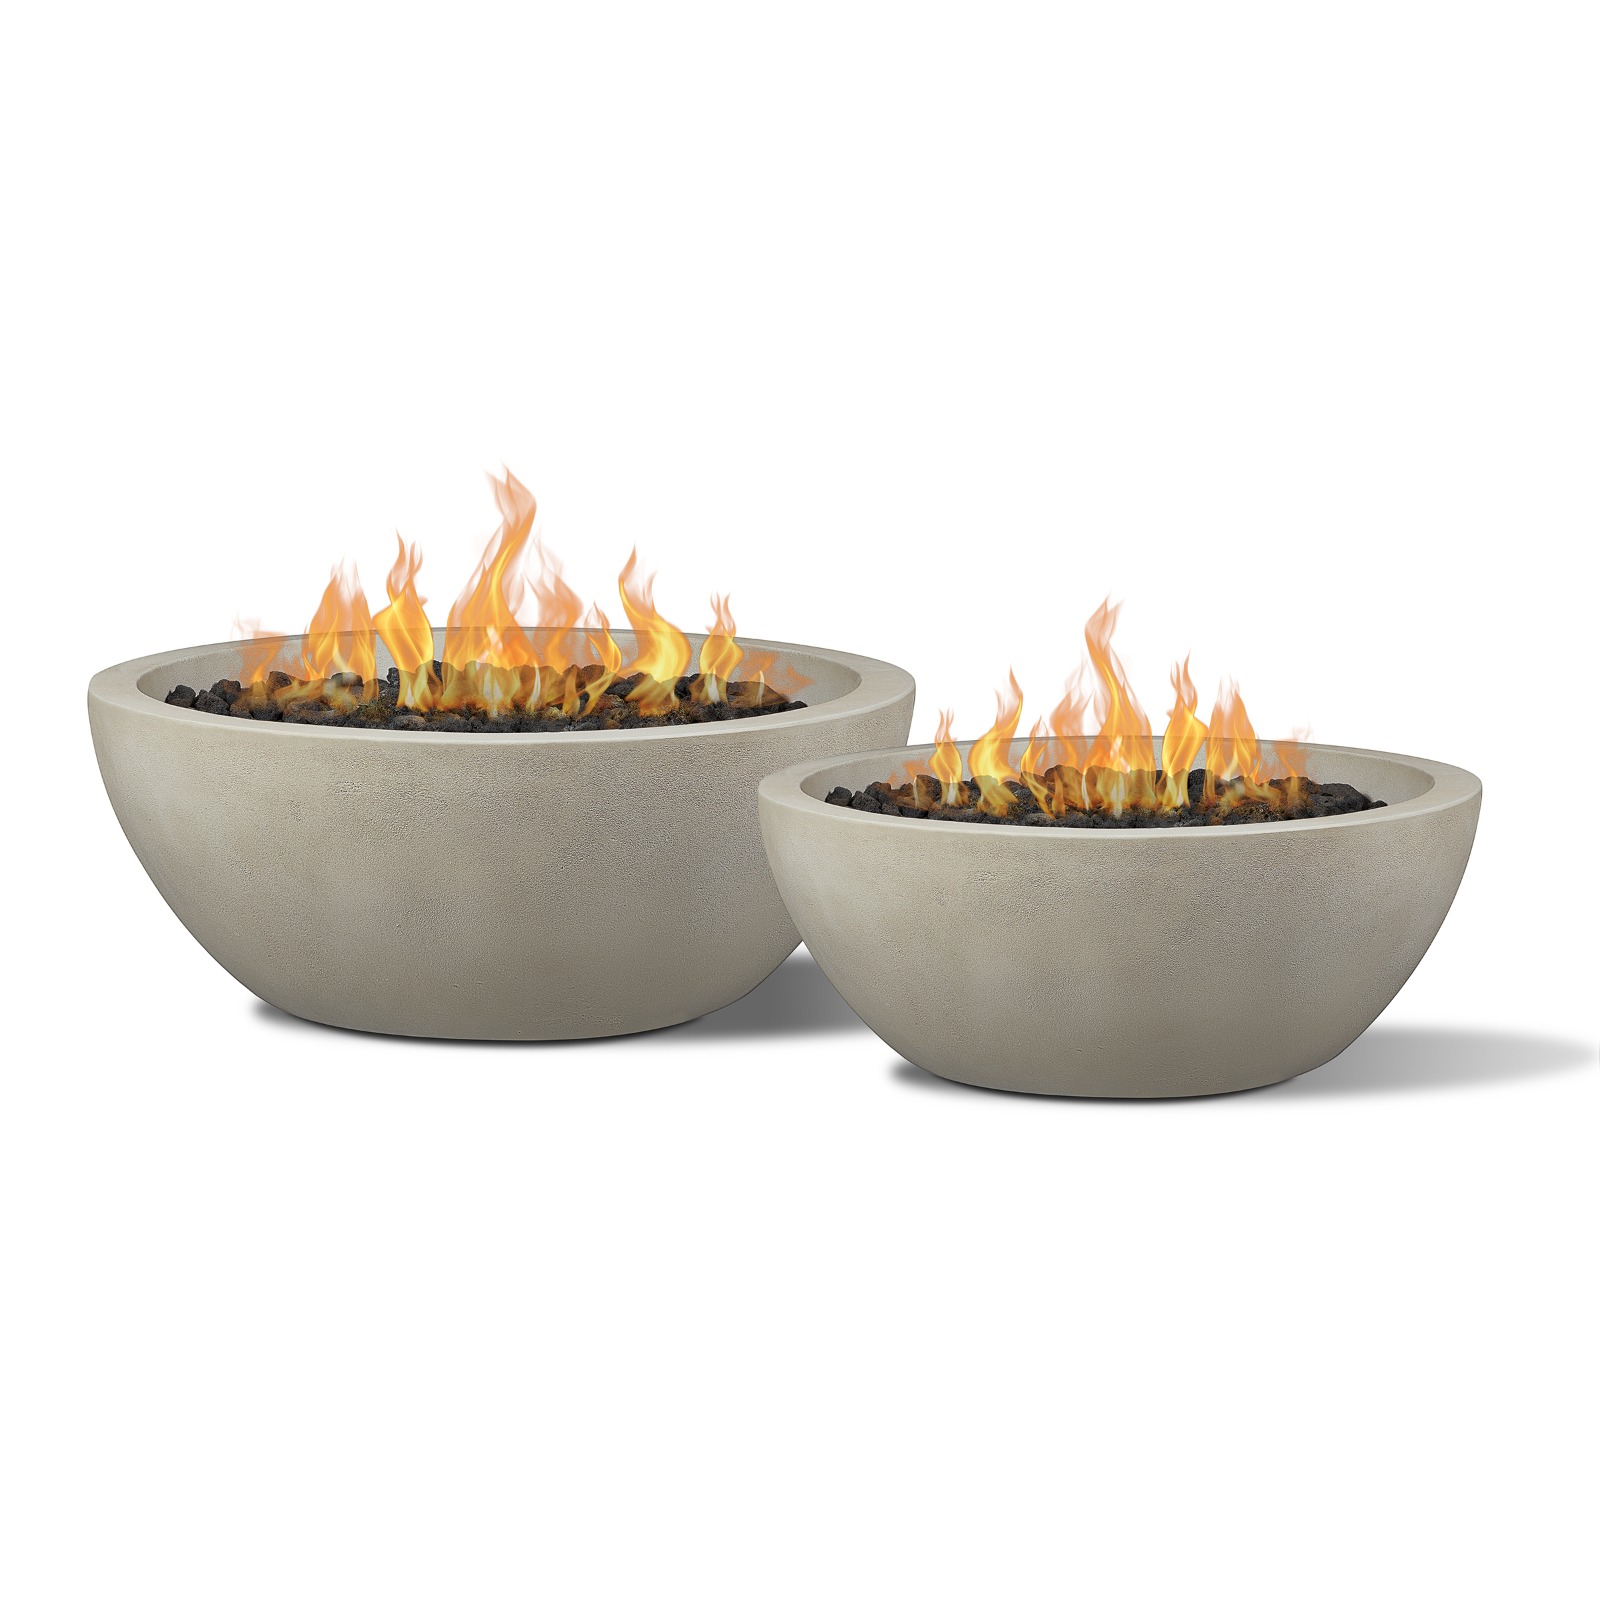 Eldora Pair GFRC Propane Fire Pit Propane Fire Bowl Outdoor Fireplace Fire Table for Backyard or Patio